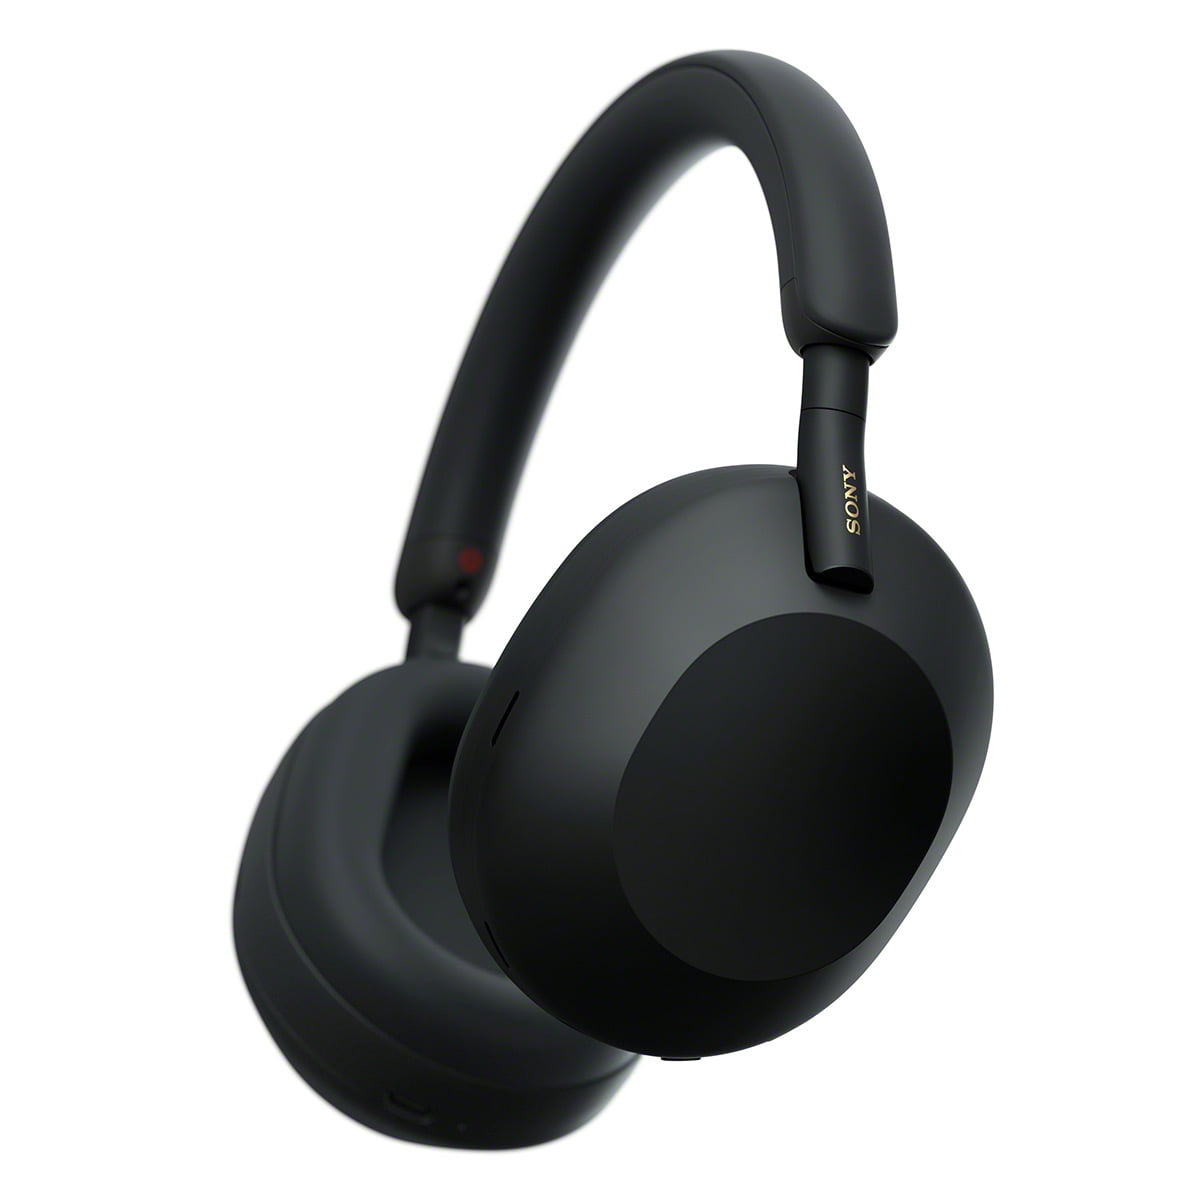 Sony WH-1000XM5 in Black: Save $79 at Walmart!